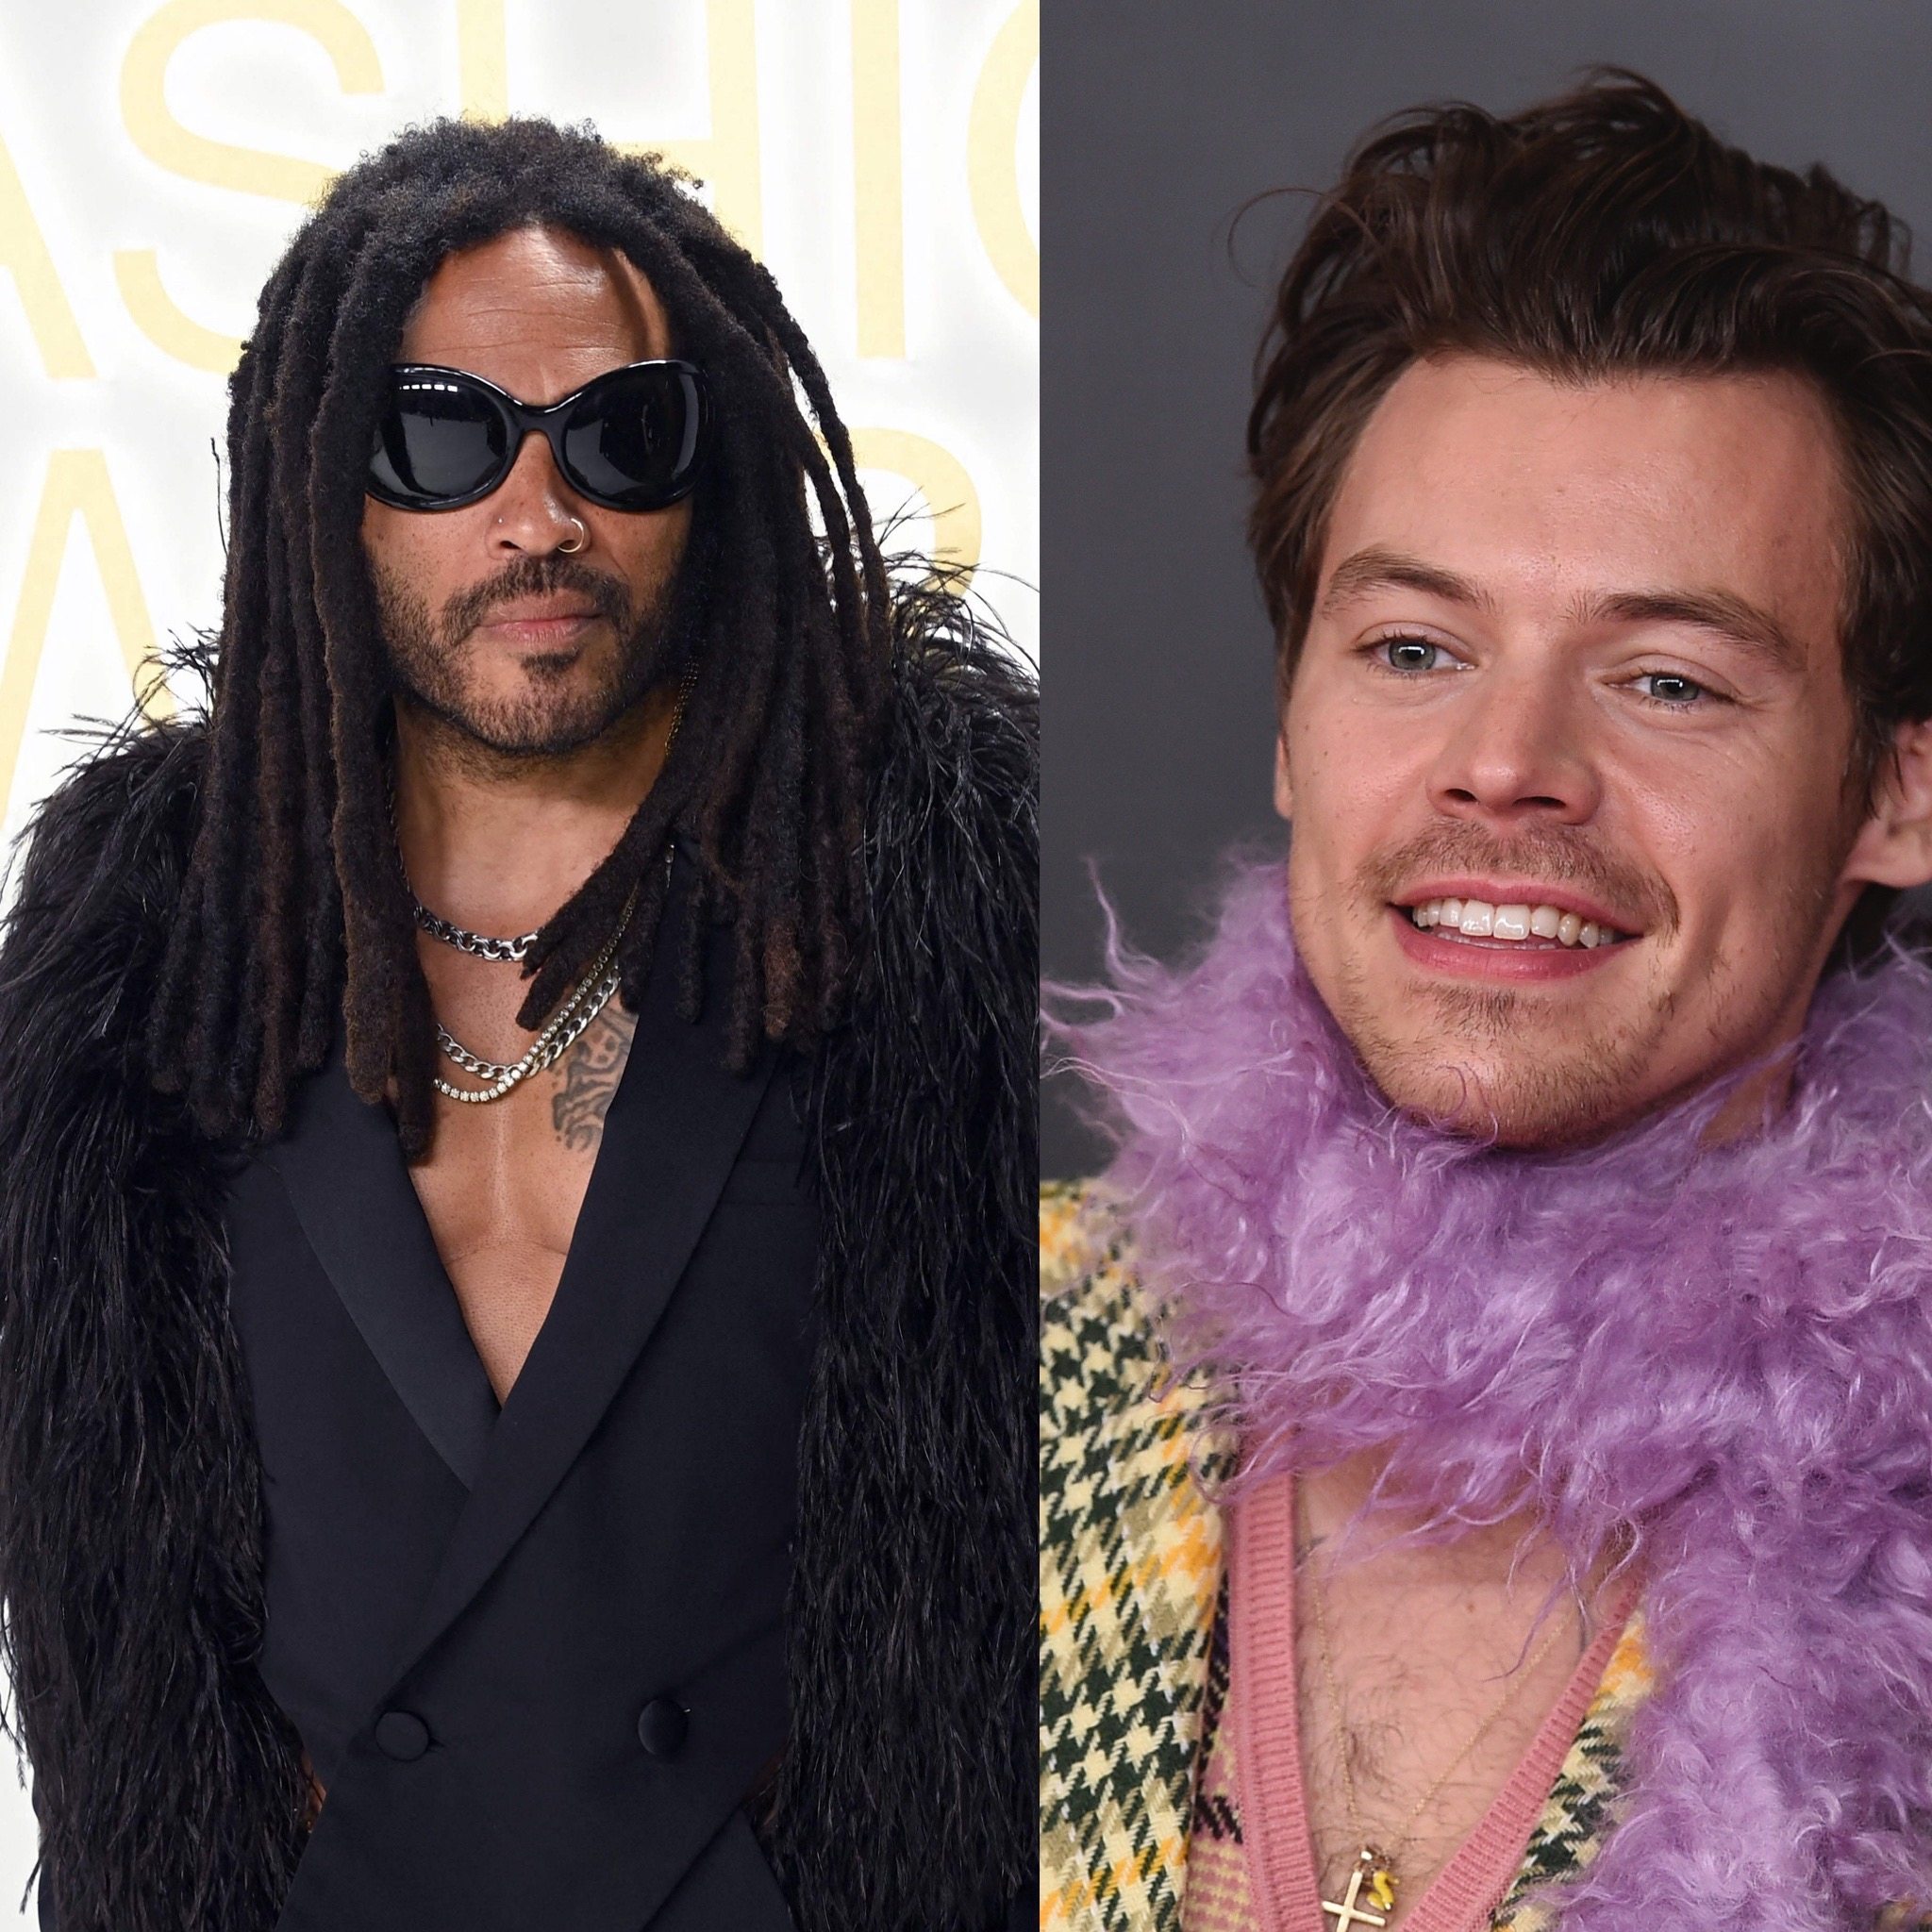 Trendsetting singers Lenny Kravitz (above left) and Harry Styles have helped push men’s style forward, to the point where womenswear designers Simone Rocha and Peter Do have launched menswear collections. Photo: AP/AFP